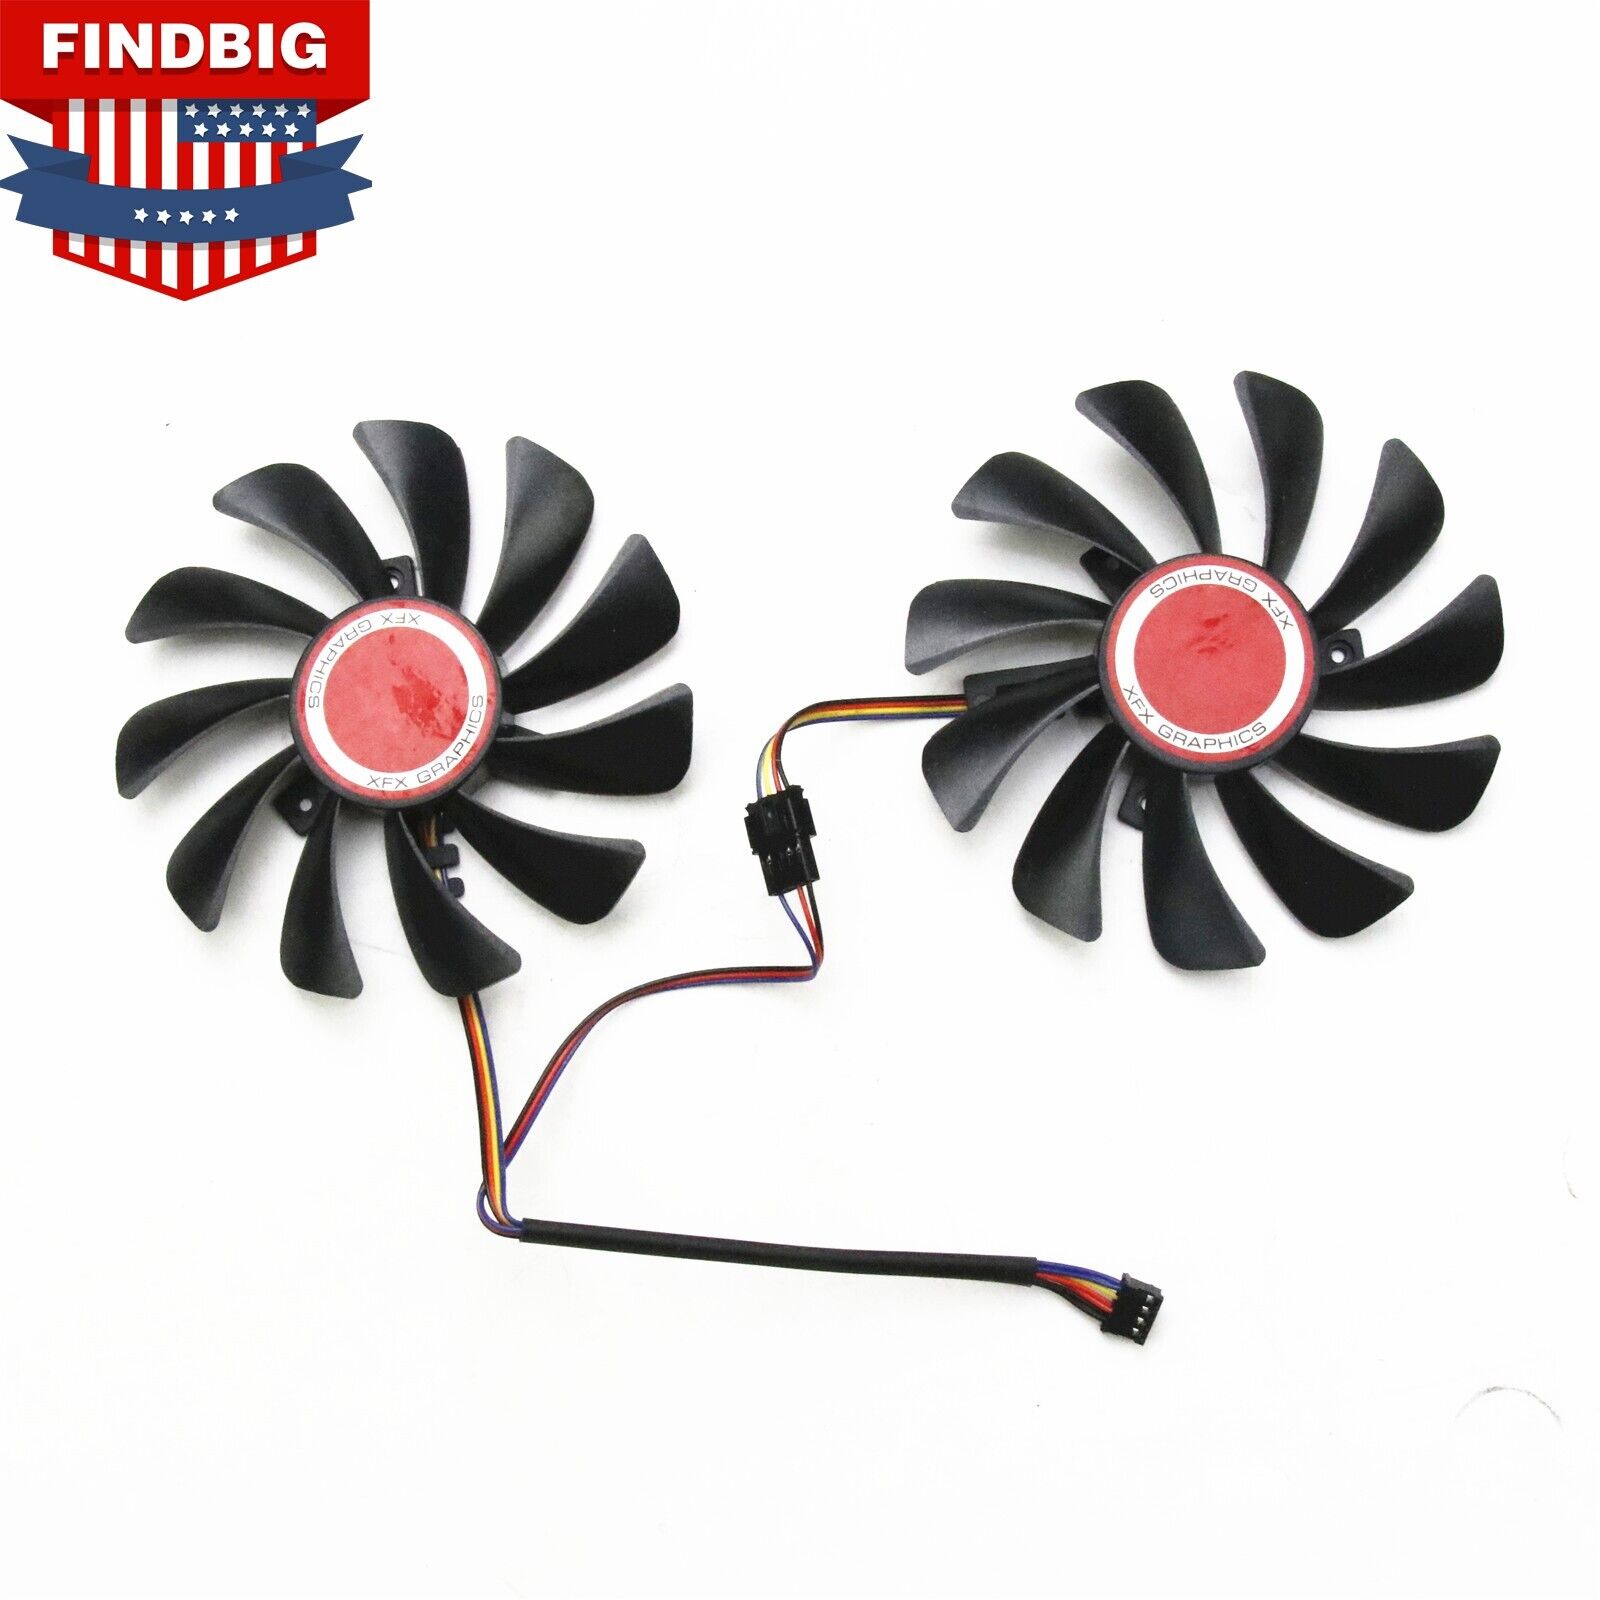 NEW Graphics Card Dual fan for XFX RX580 584 588 95mm Video Card Cooler Fan